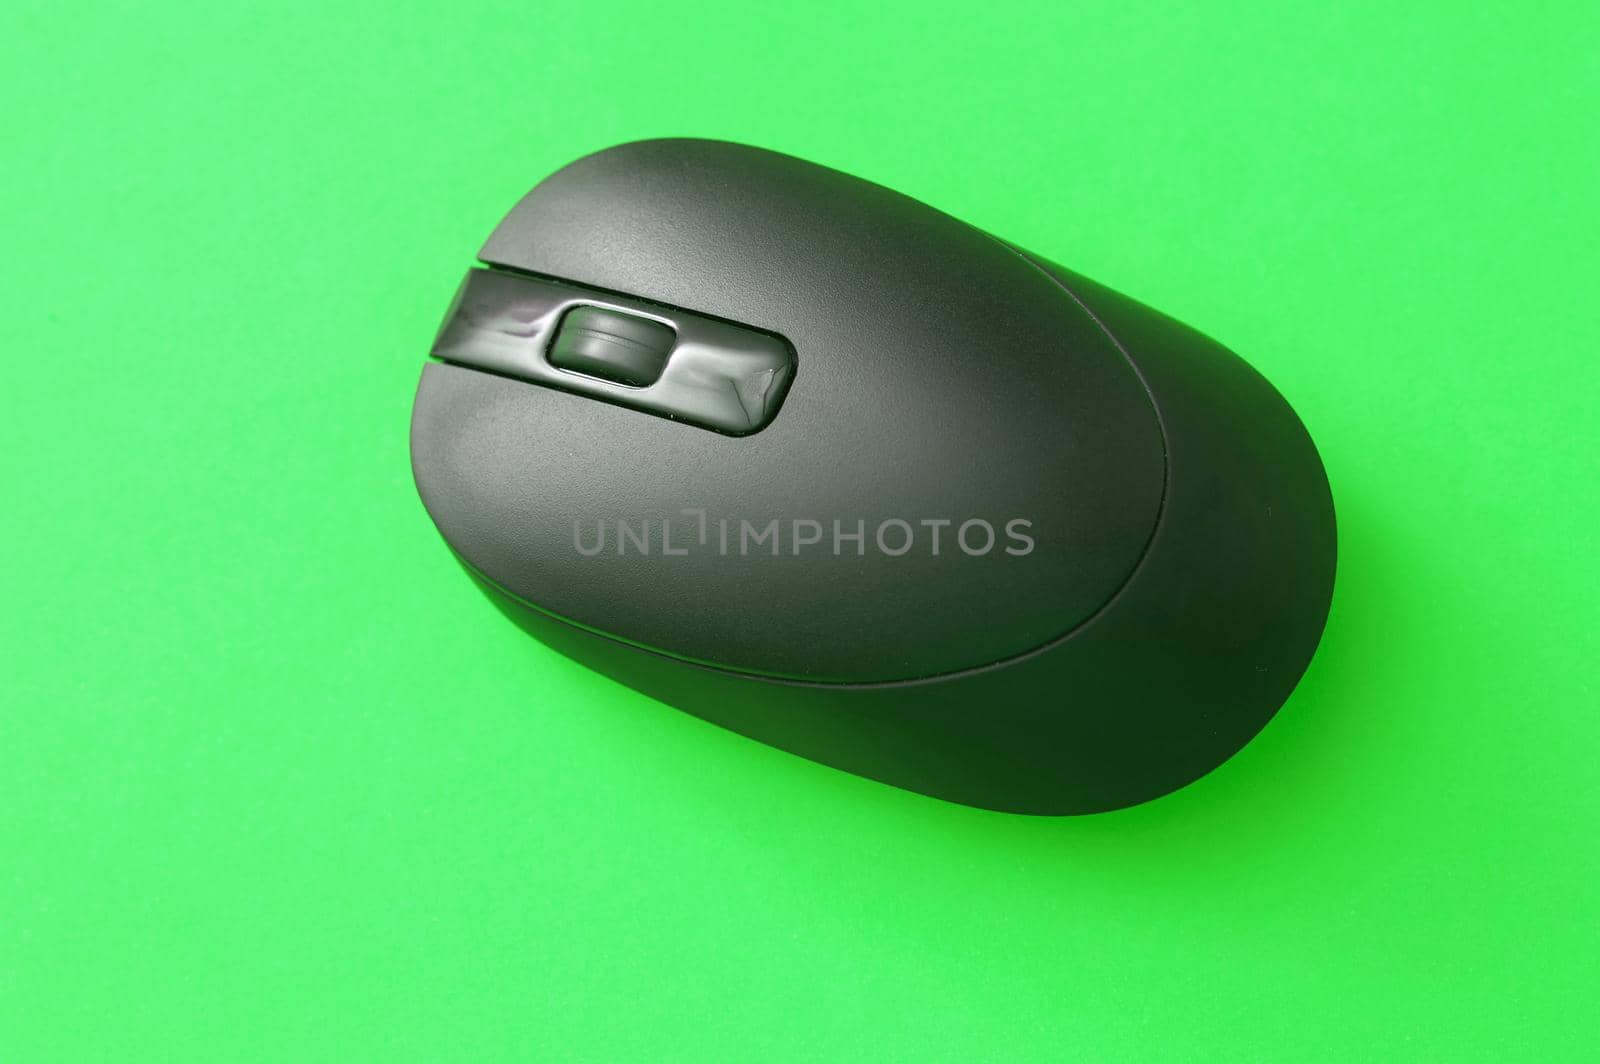 Black Wireless Computer Mouse Isolated on Green by sanisra